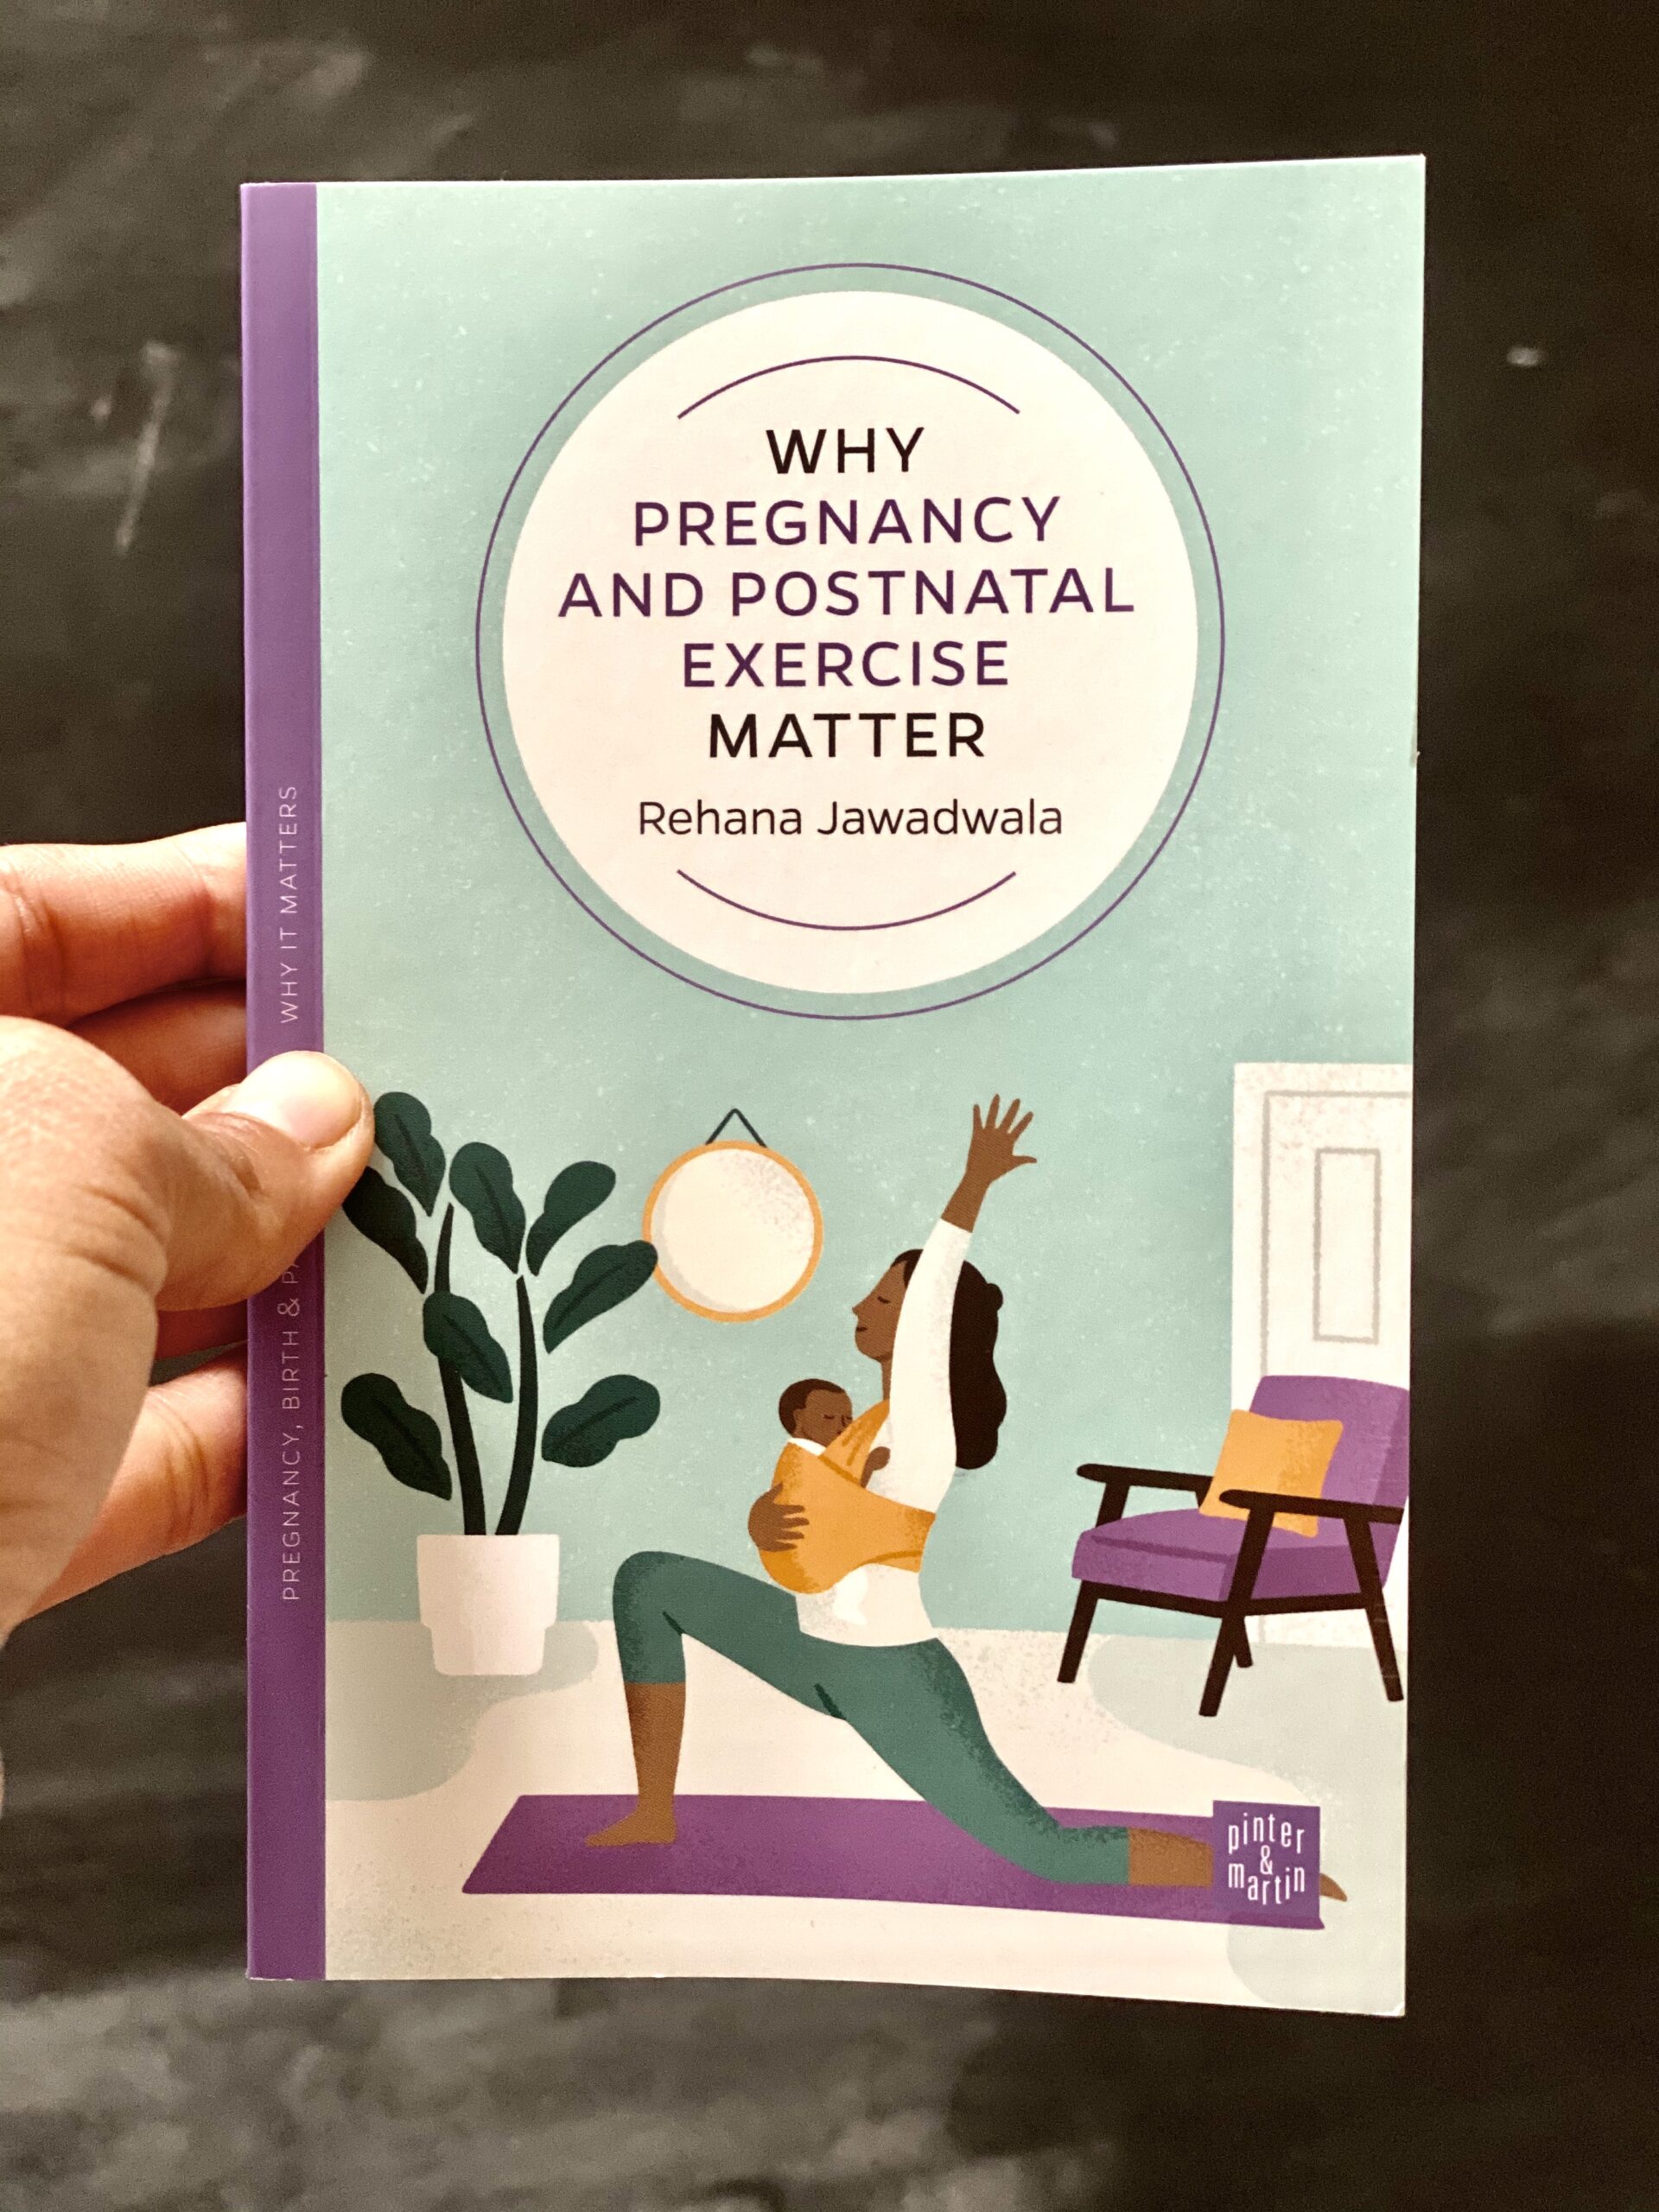 Book - Why Pregnancy and Postnatal Exercise Matter